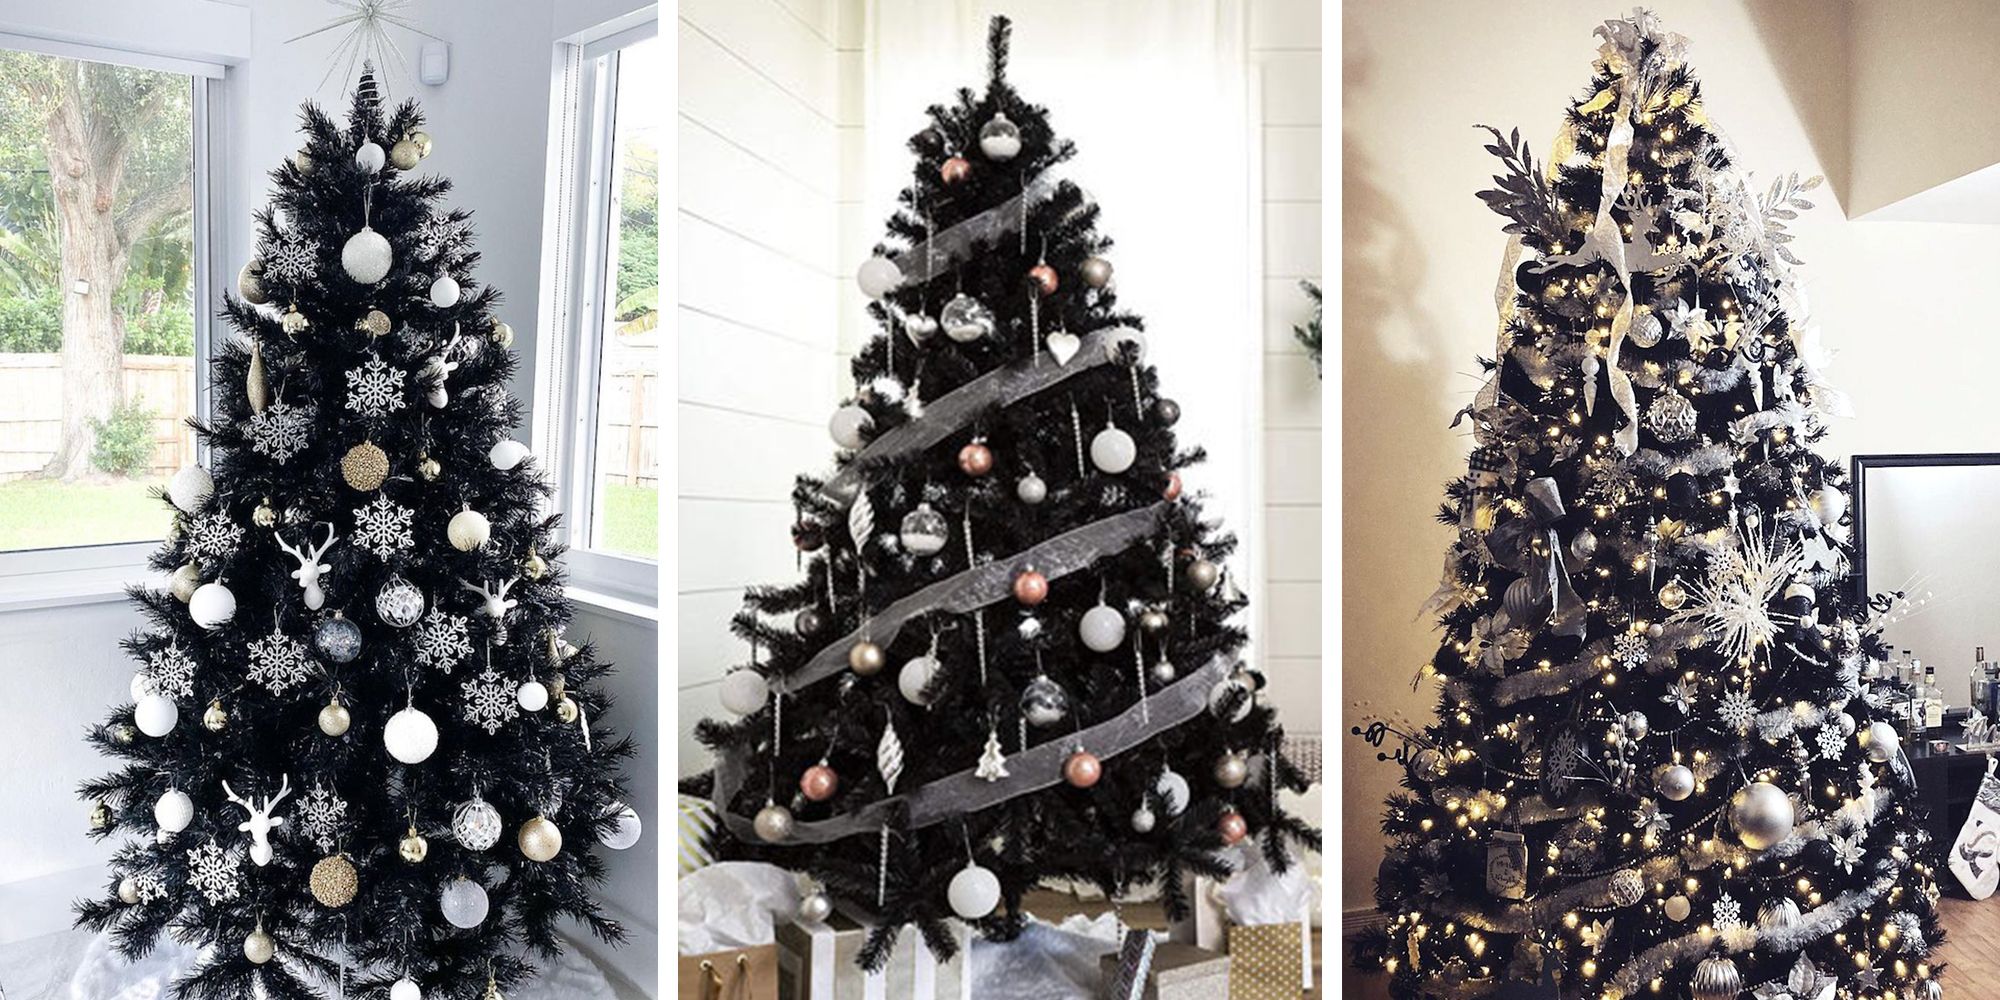 These Stunning Black Christmas Trees Will Convince You to Go Dark This Year